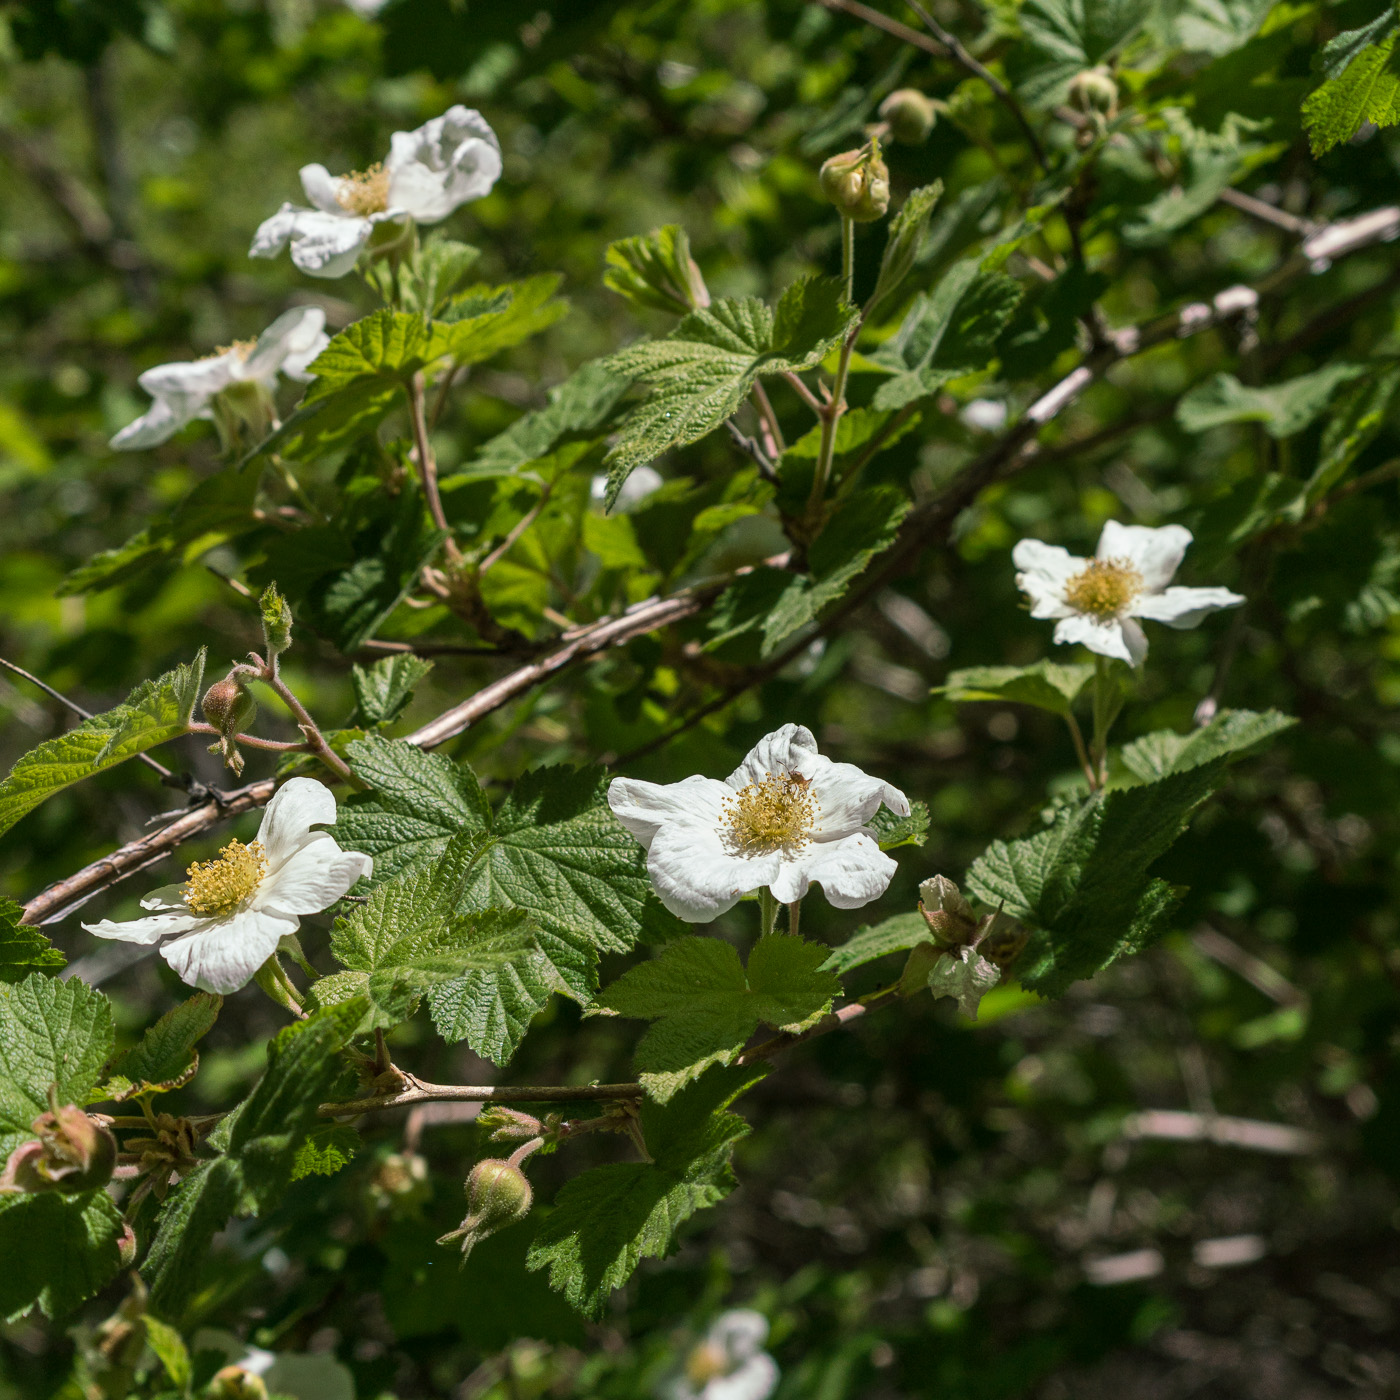 Raspberry flowers along the Canada del Oro. May 2017.